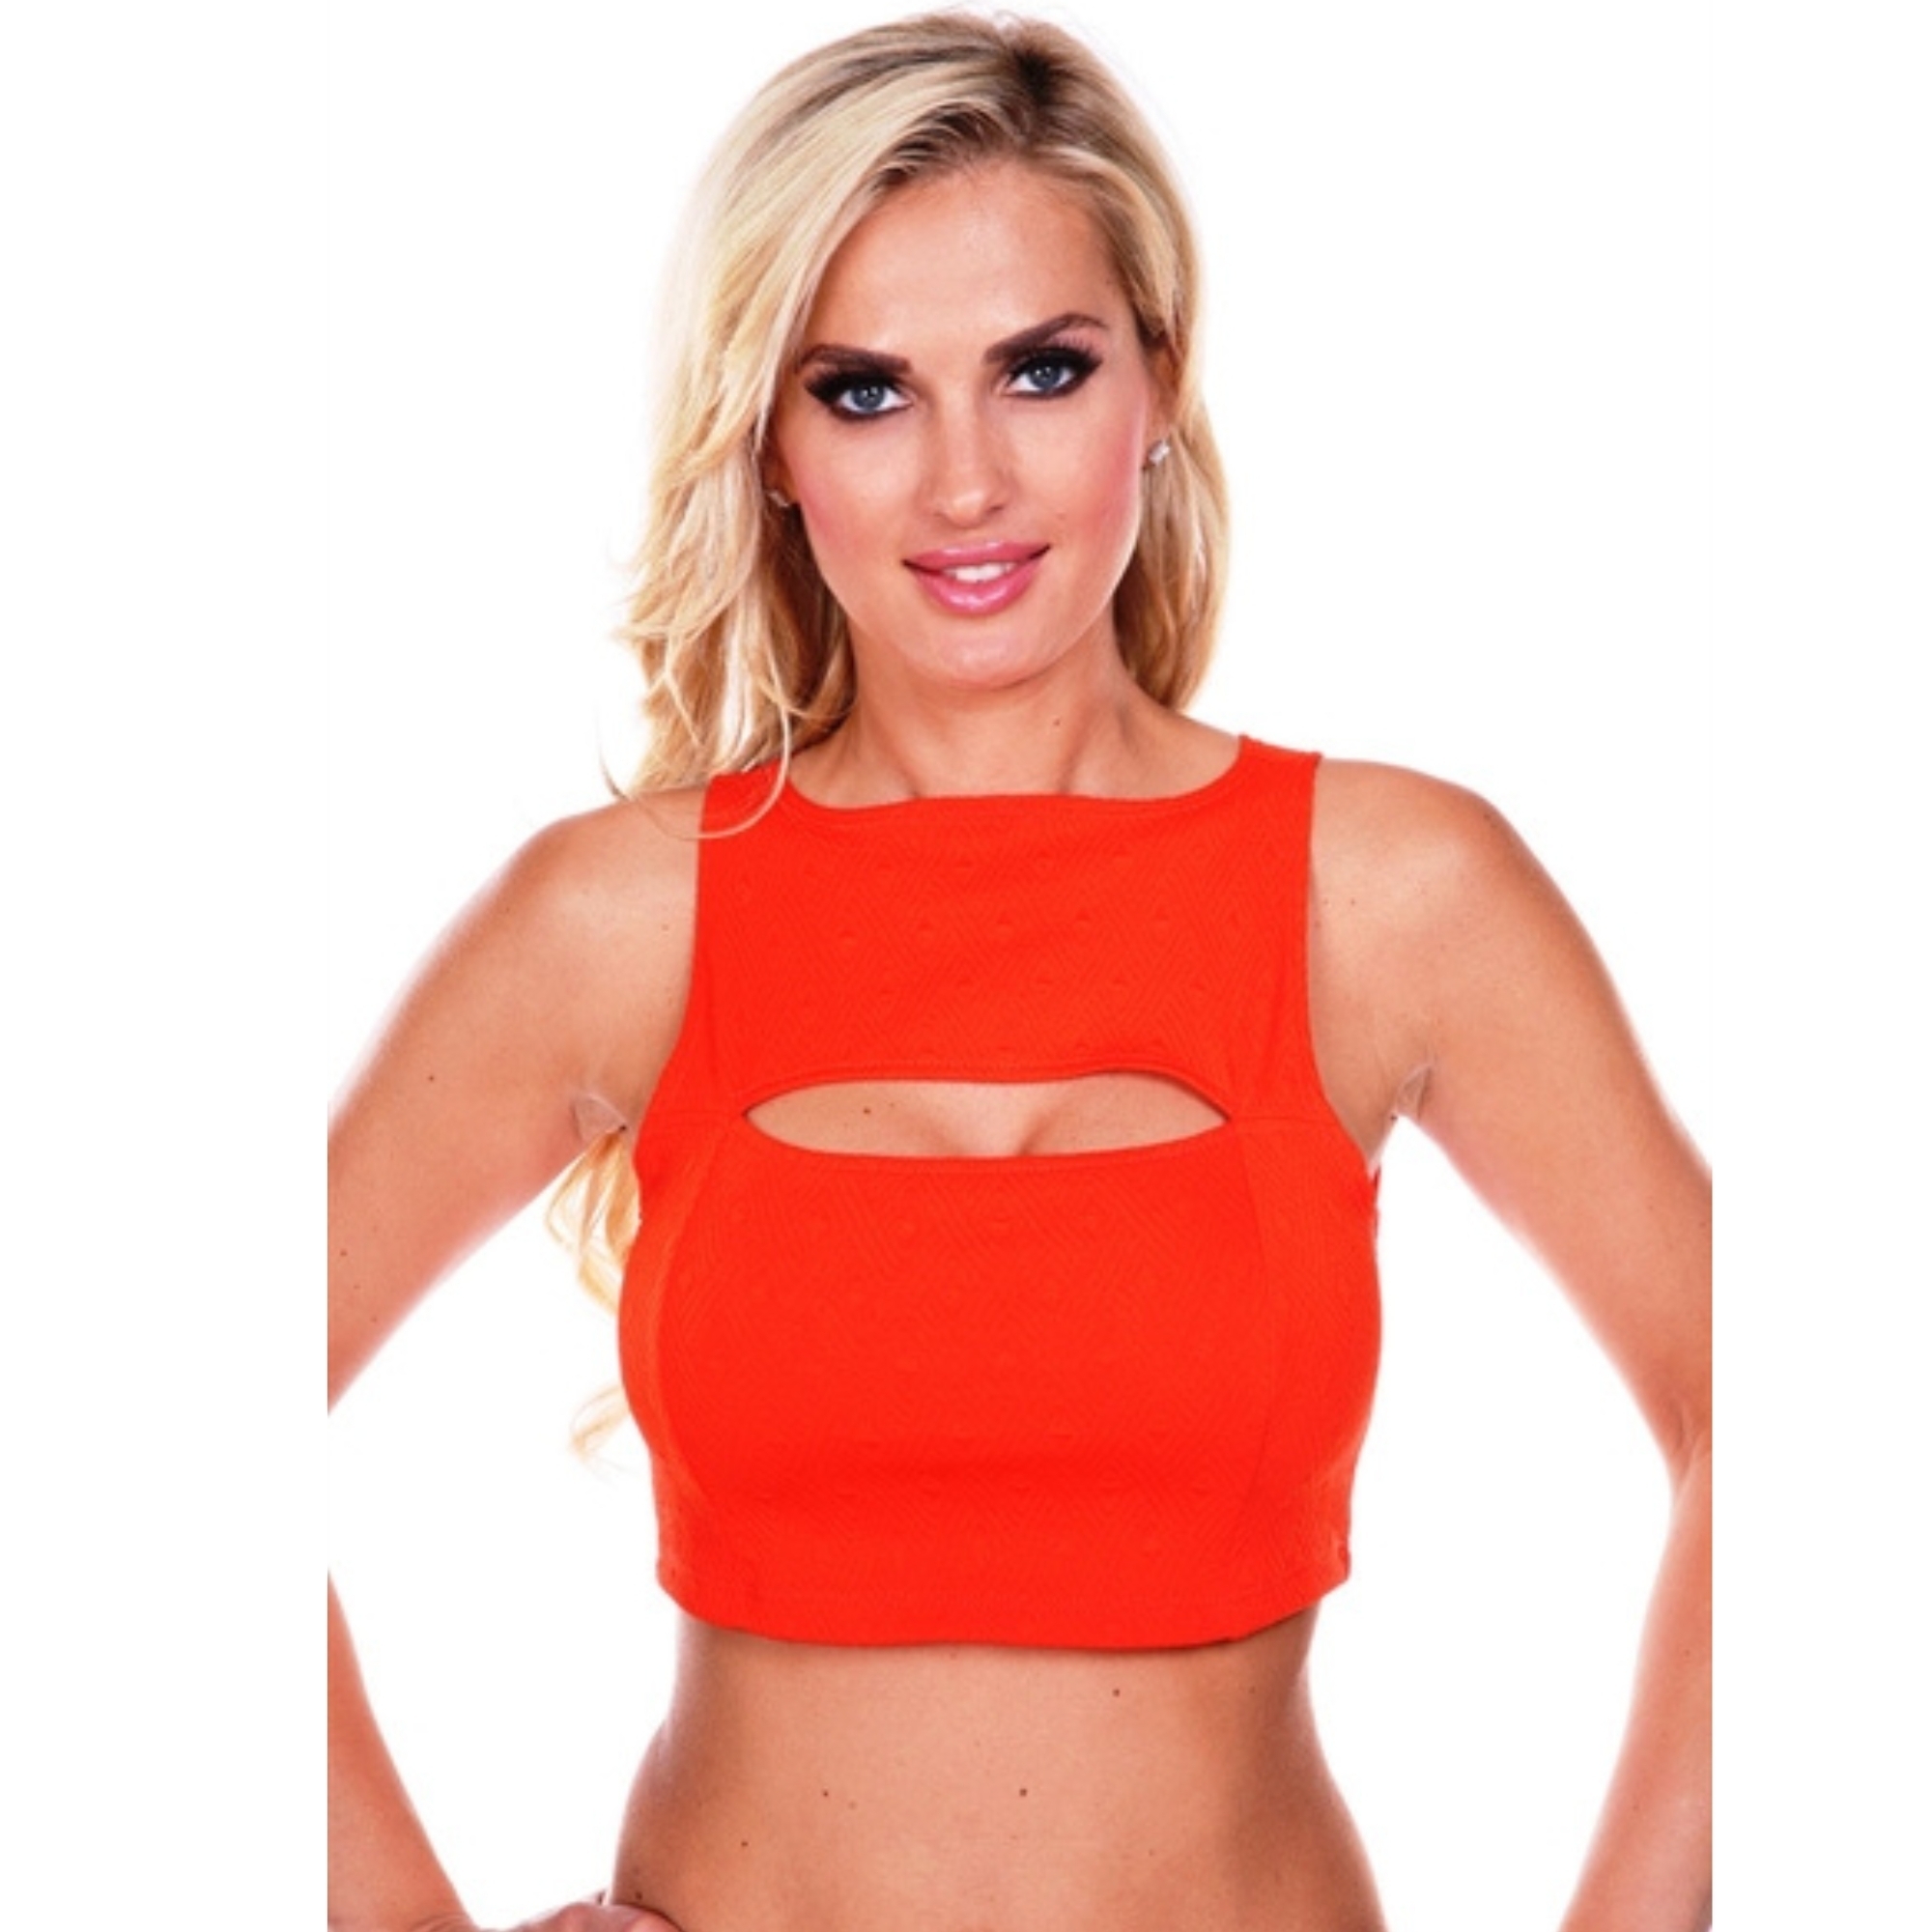 White Mark Women's Crop Top - Coral, Large